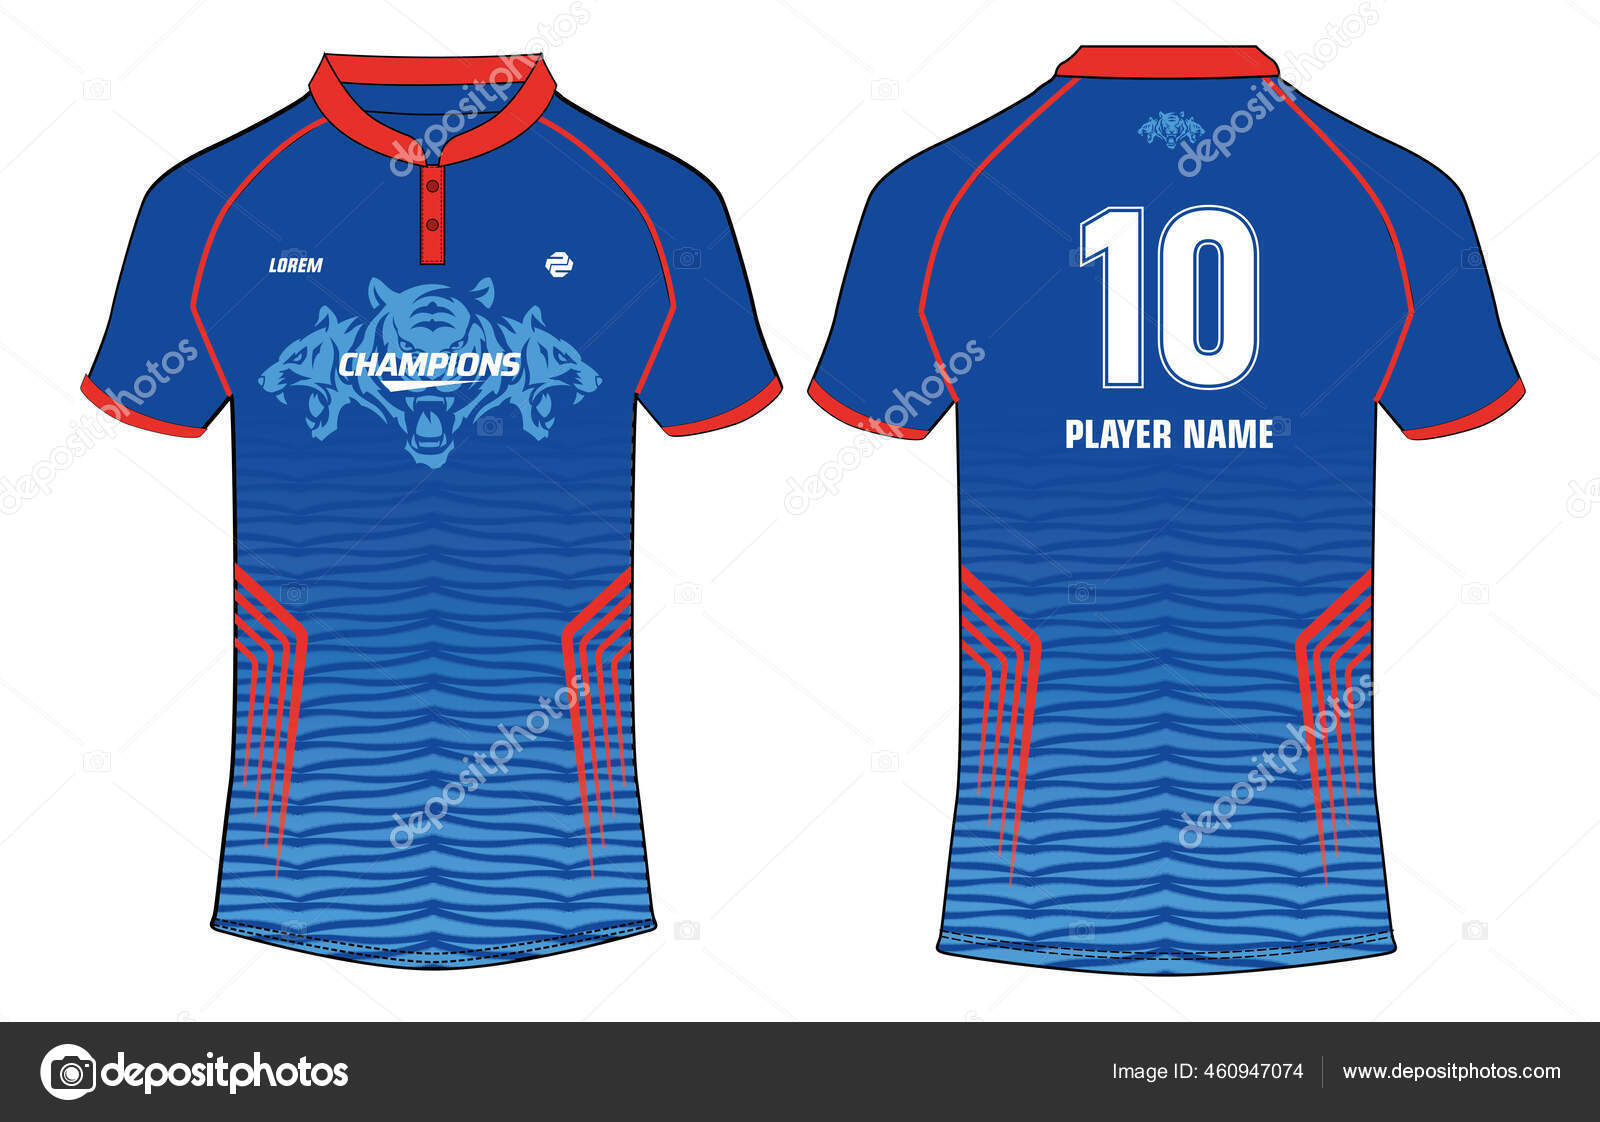 Download Sports Jersey Shirt Design Concept Vector Template Cricket Jersey Concept Stock Vector Royalty Free Vector Image By C Faalil 460947074